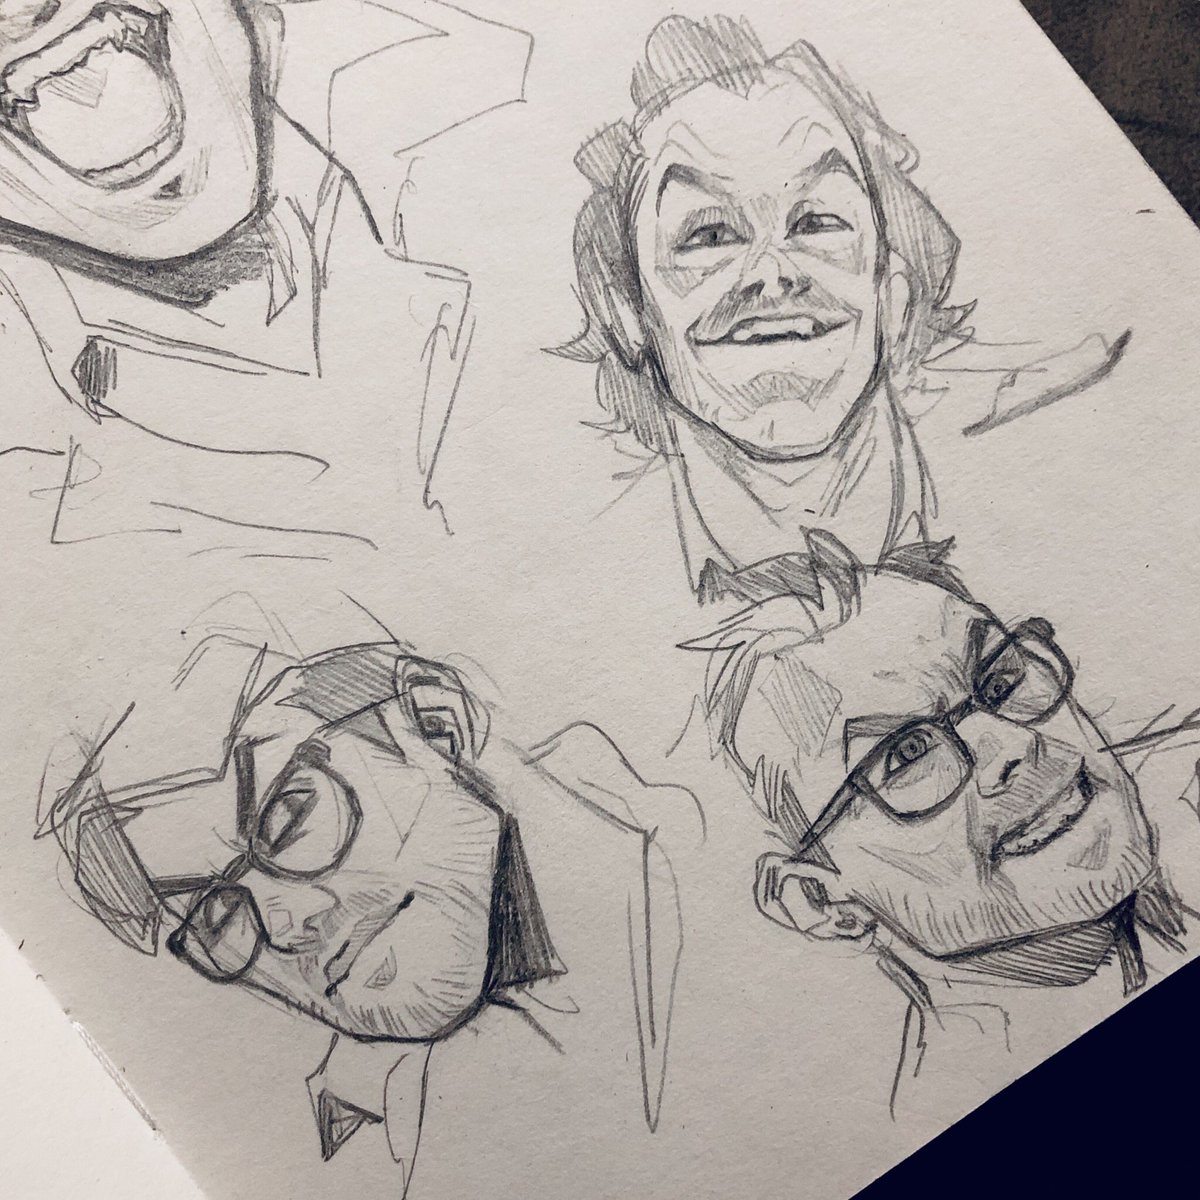 Ty @hxrryjxke for reminding me how much I love jack nicholson's eyebrows.. also christian slater's 